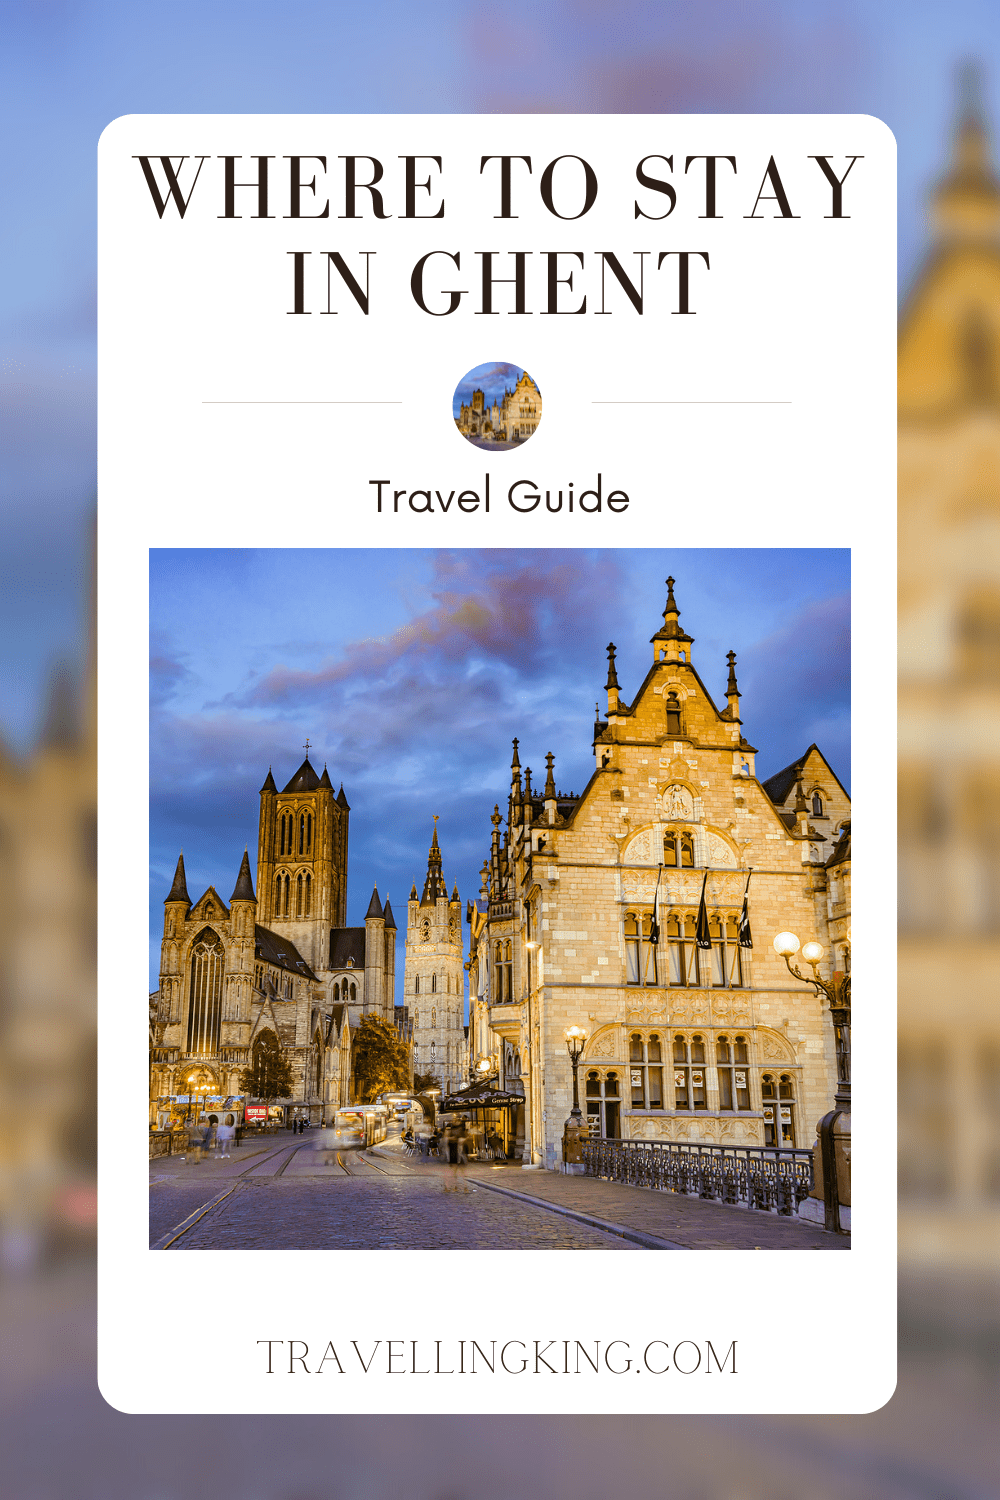 Where to stay in Ghent